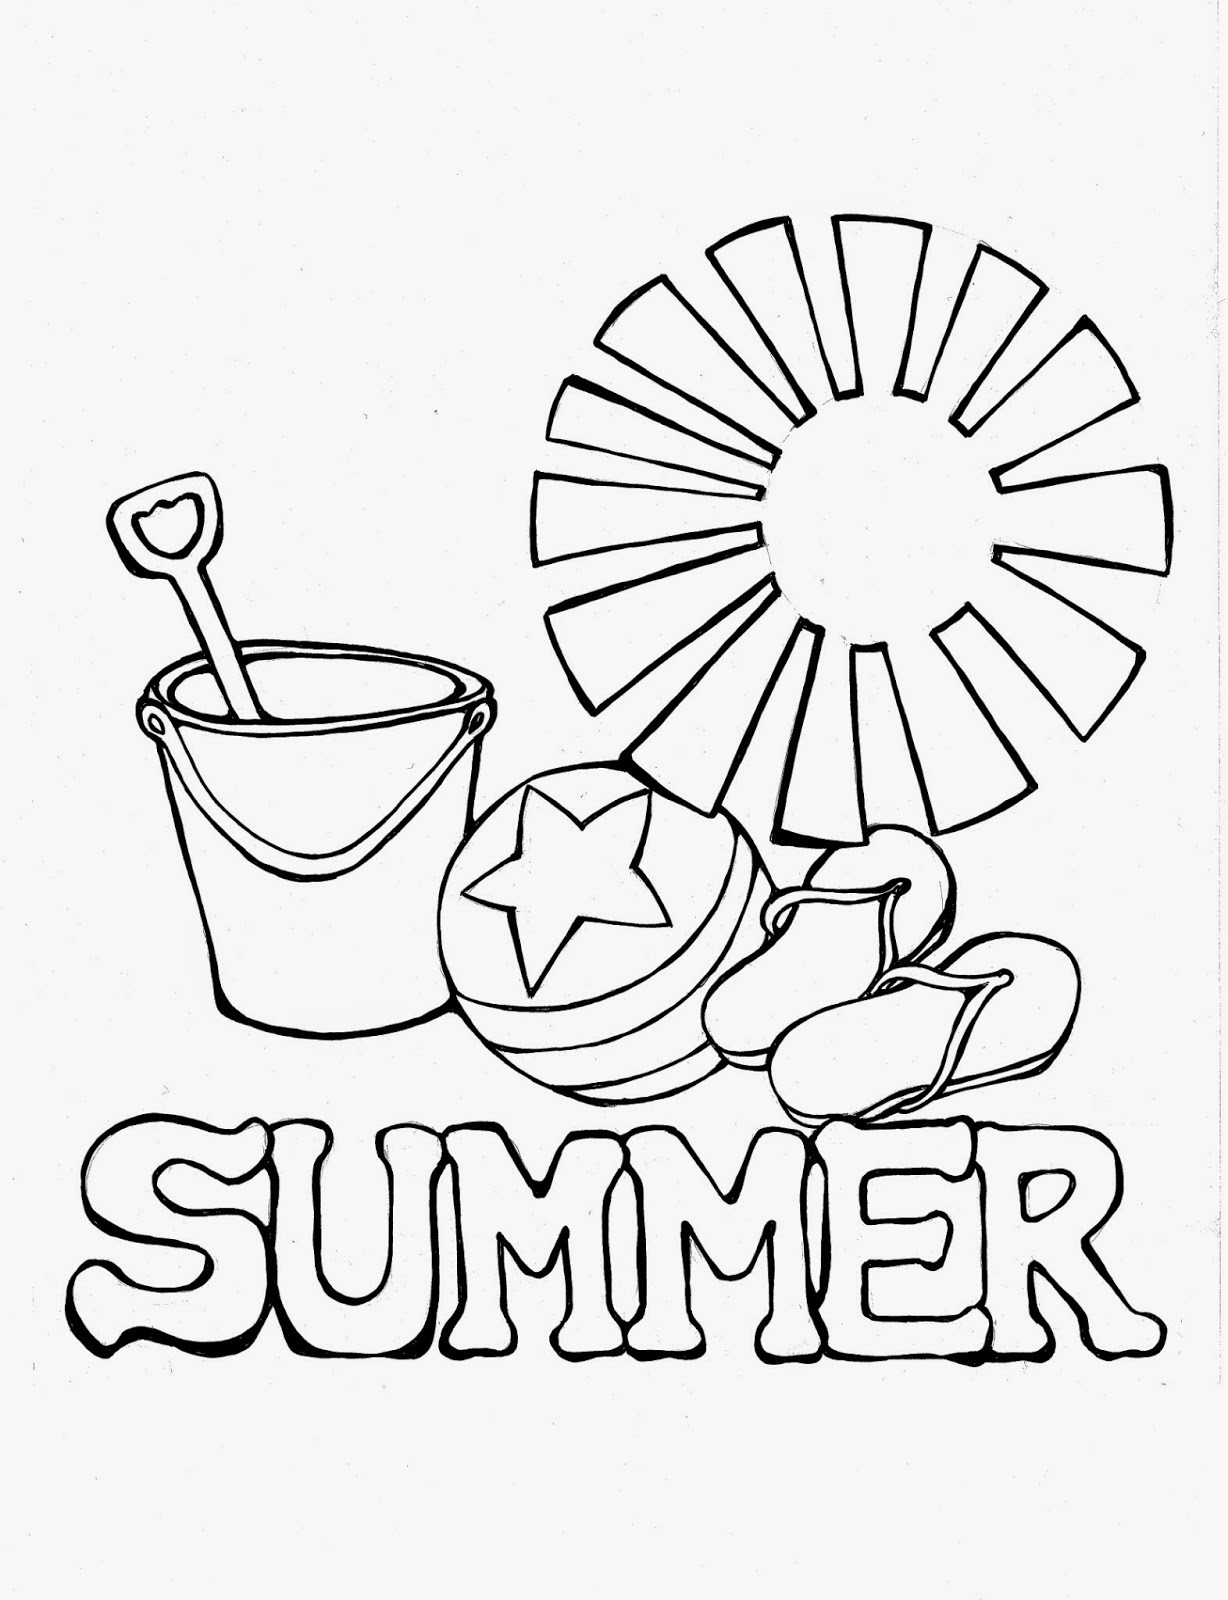 Summer Coloring Pages For Kids Printable
 